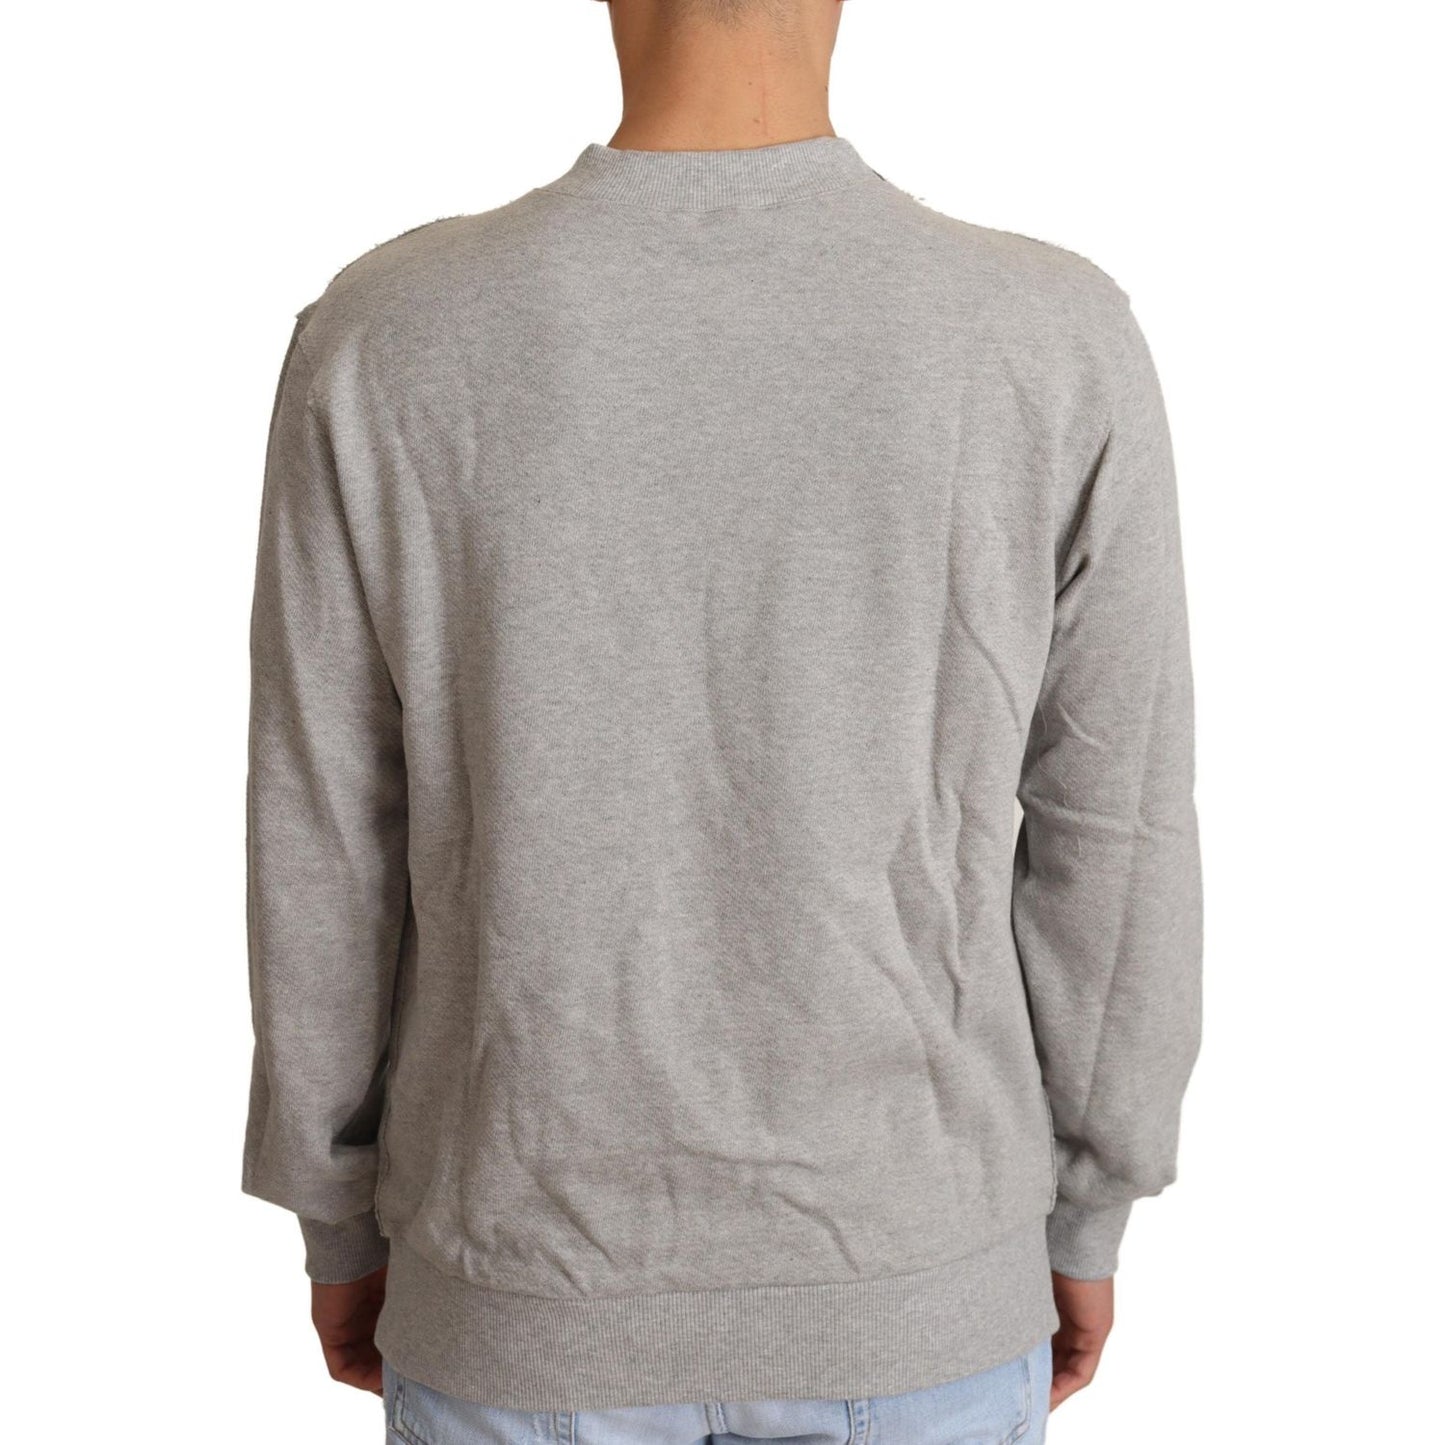 Dolce & Gabbana Sophisticated Gray Crewneck Sweater MAN SWEATERS gray-cotton-crewneck-pullover-sweater-1